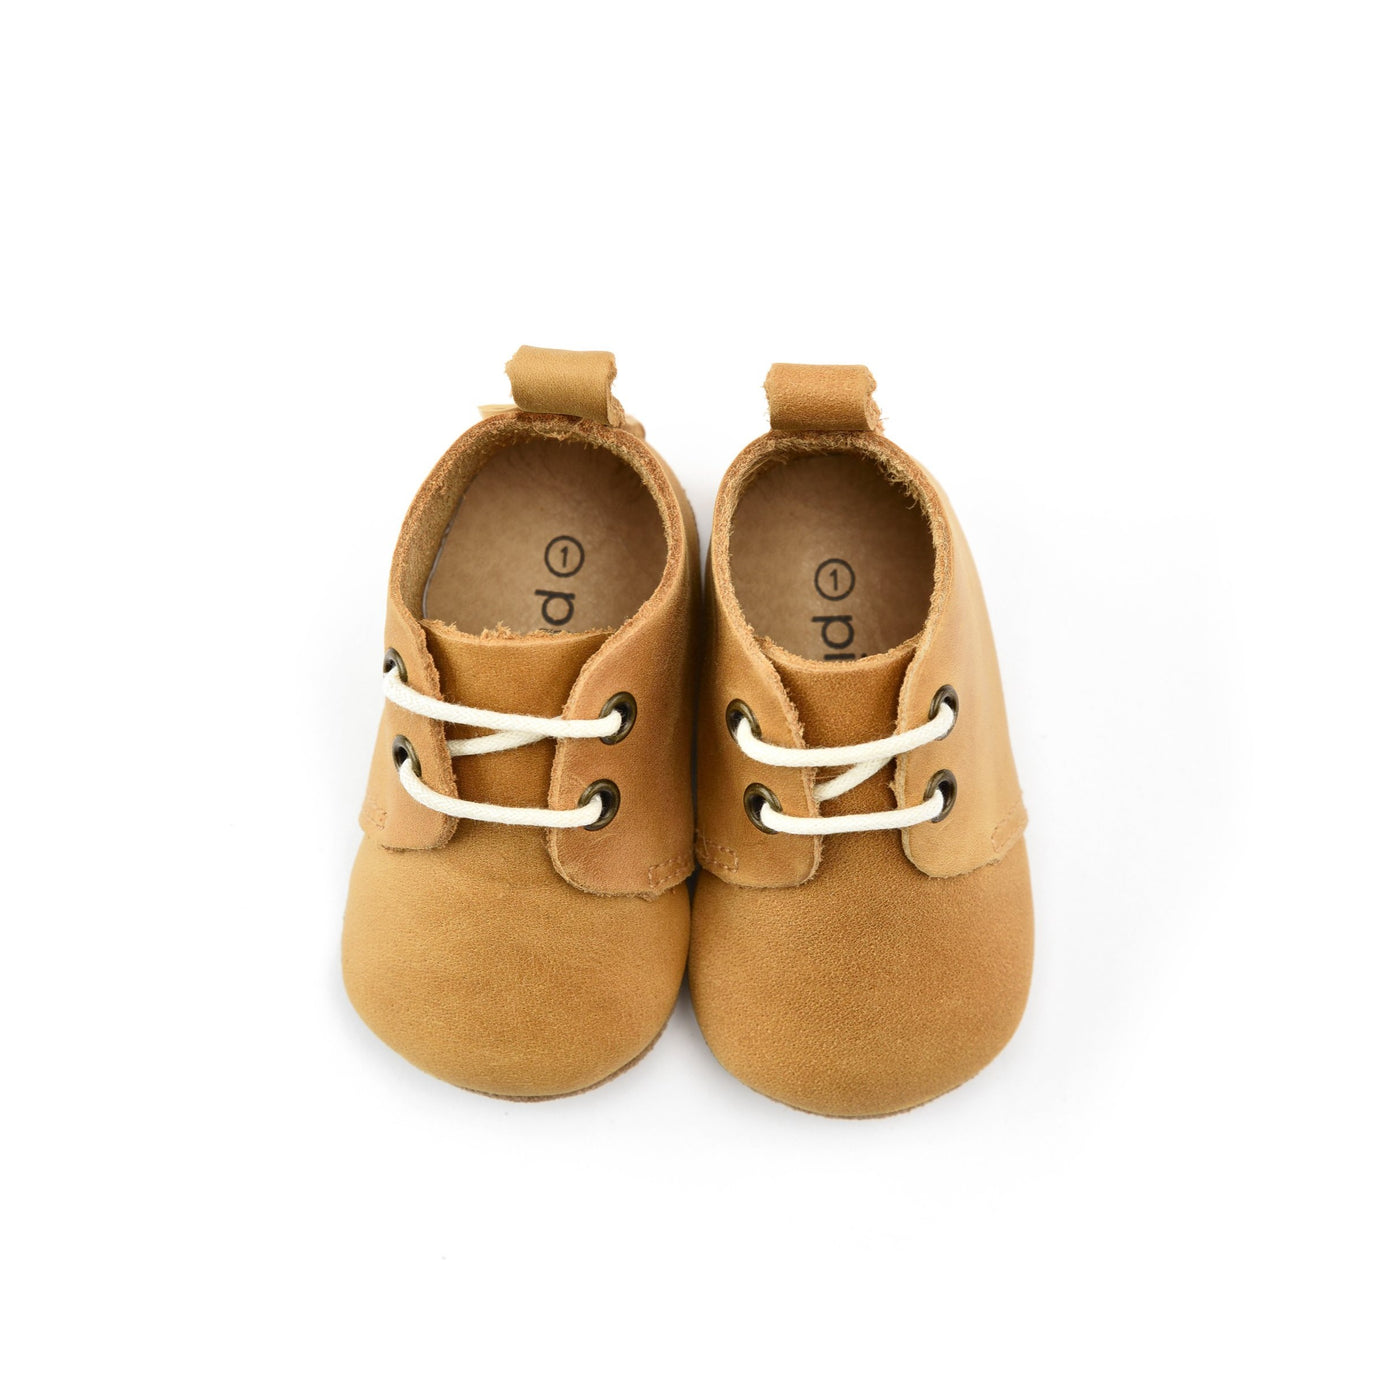 Natural - Low Top Oxfords - Soft Sole